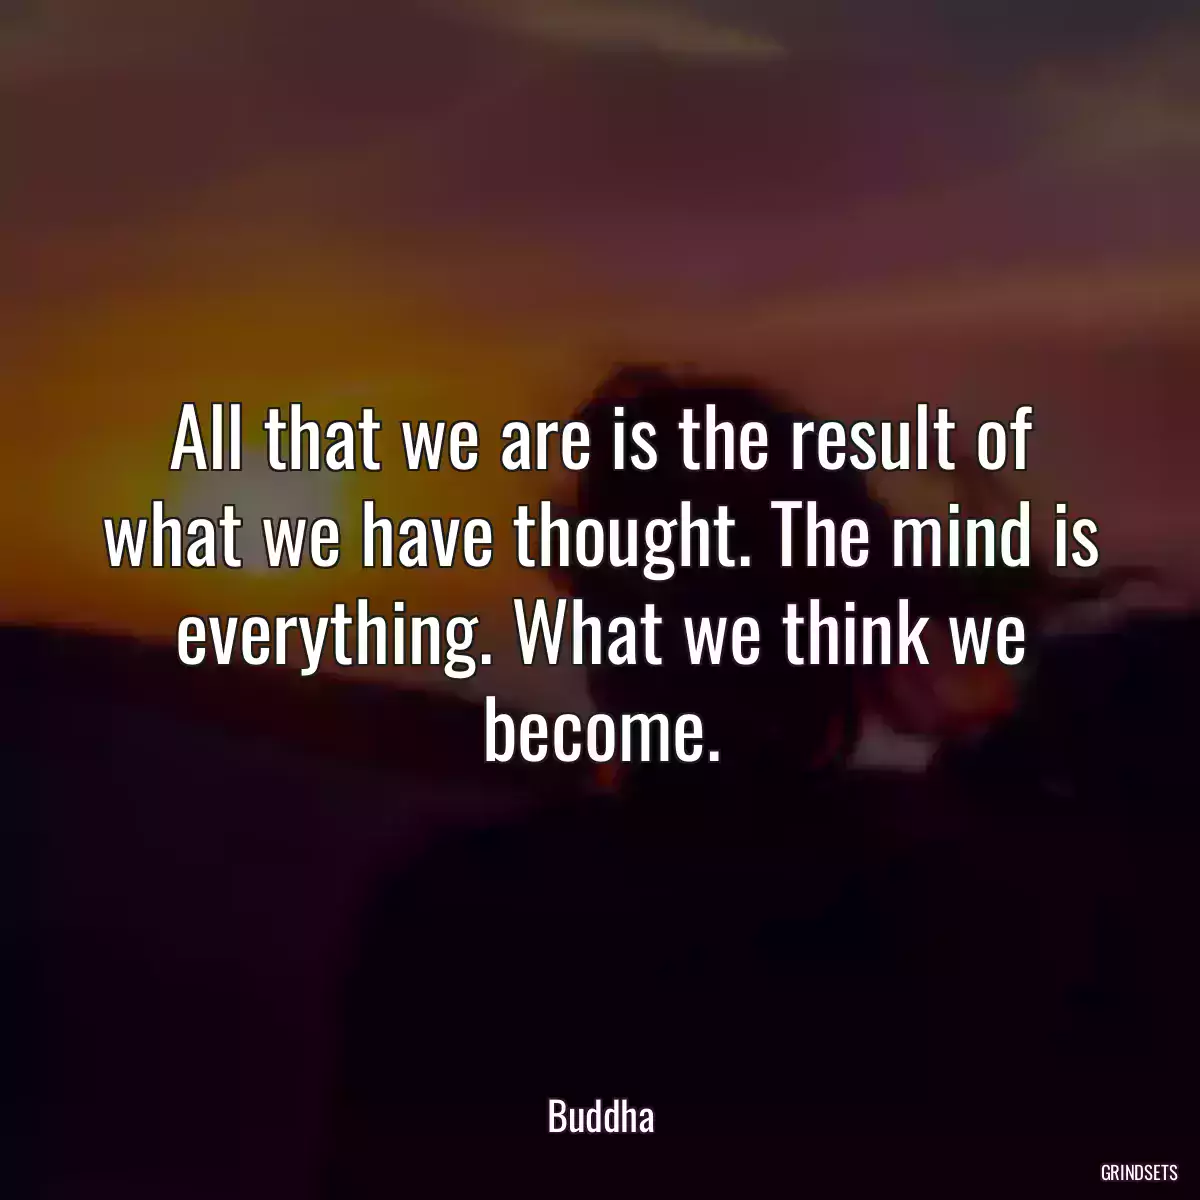 All that we are is the result of what we have thought. The mind is everything. What we think we become.